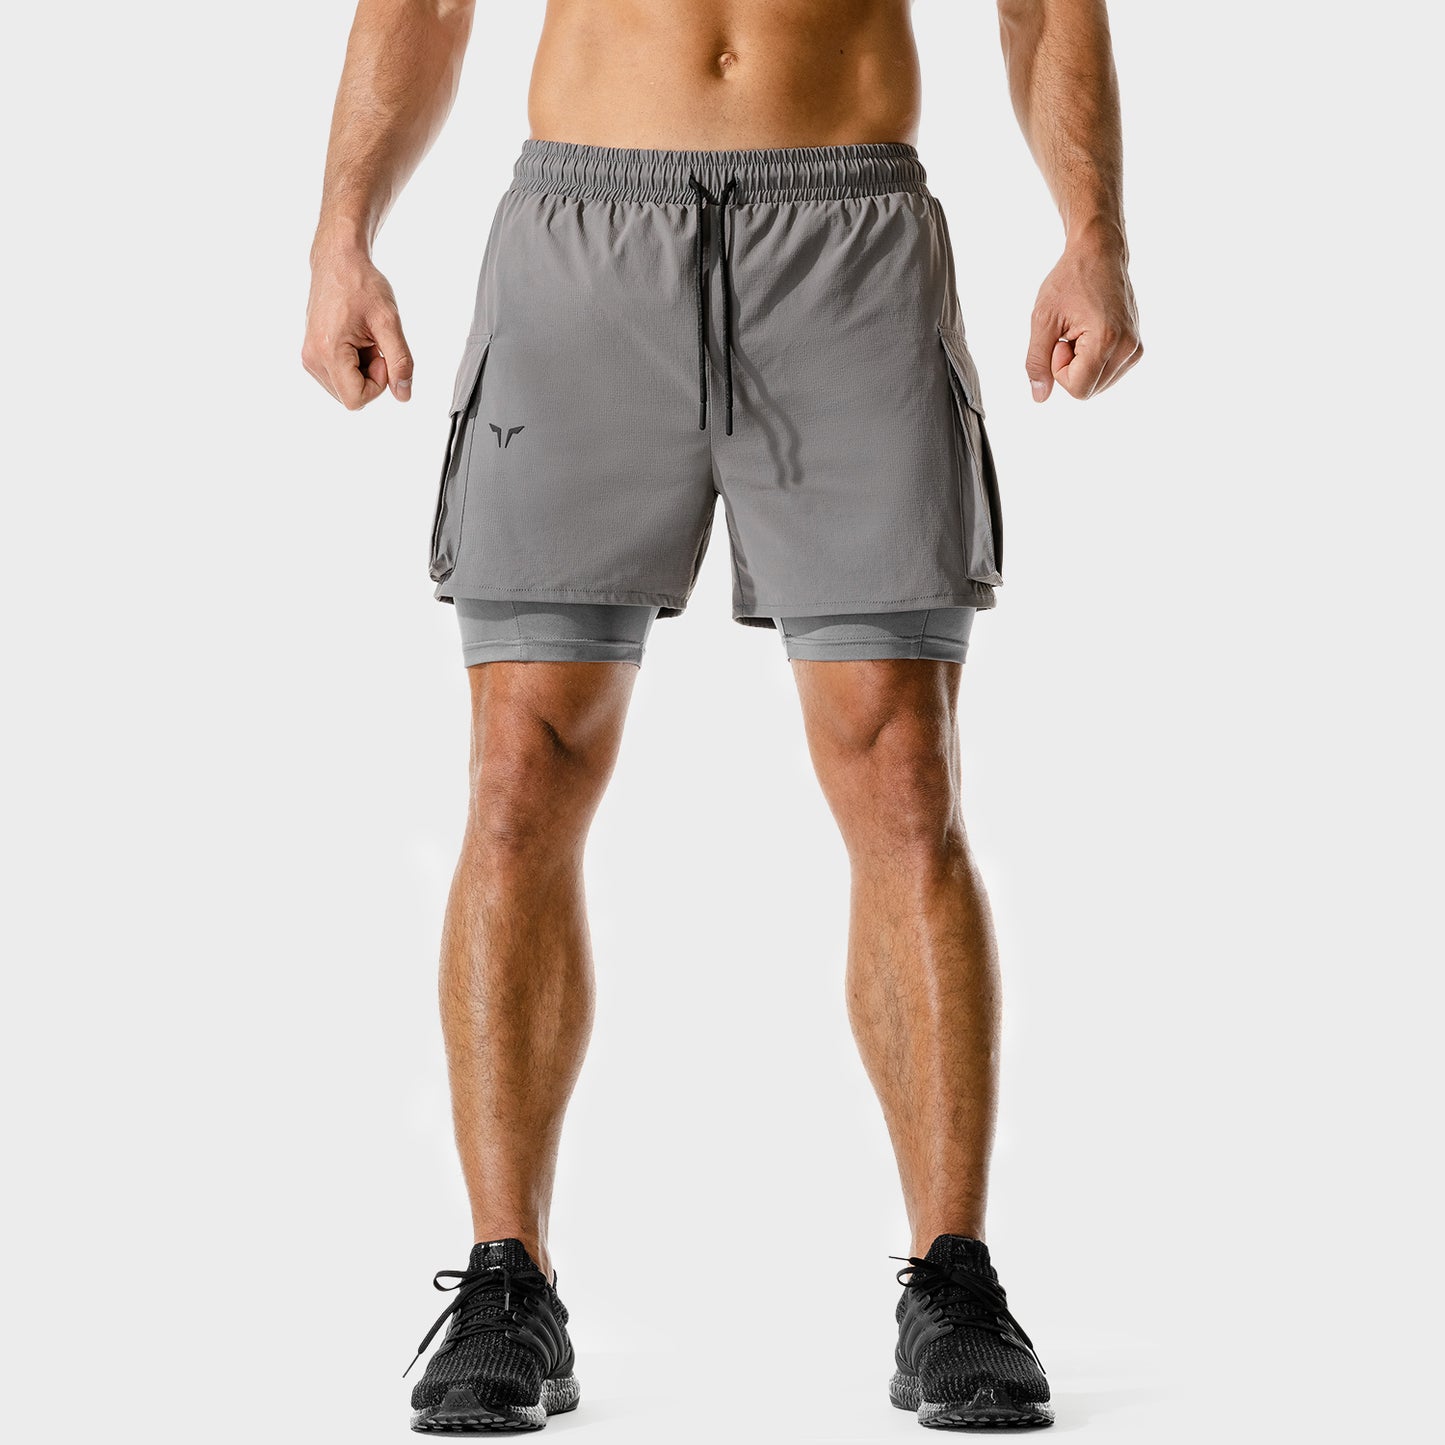 squatwolf-gym-wear-code-2-in-1-cargo-shorts-grey-workout-shorts-for-men